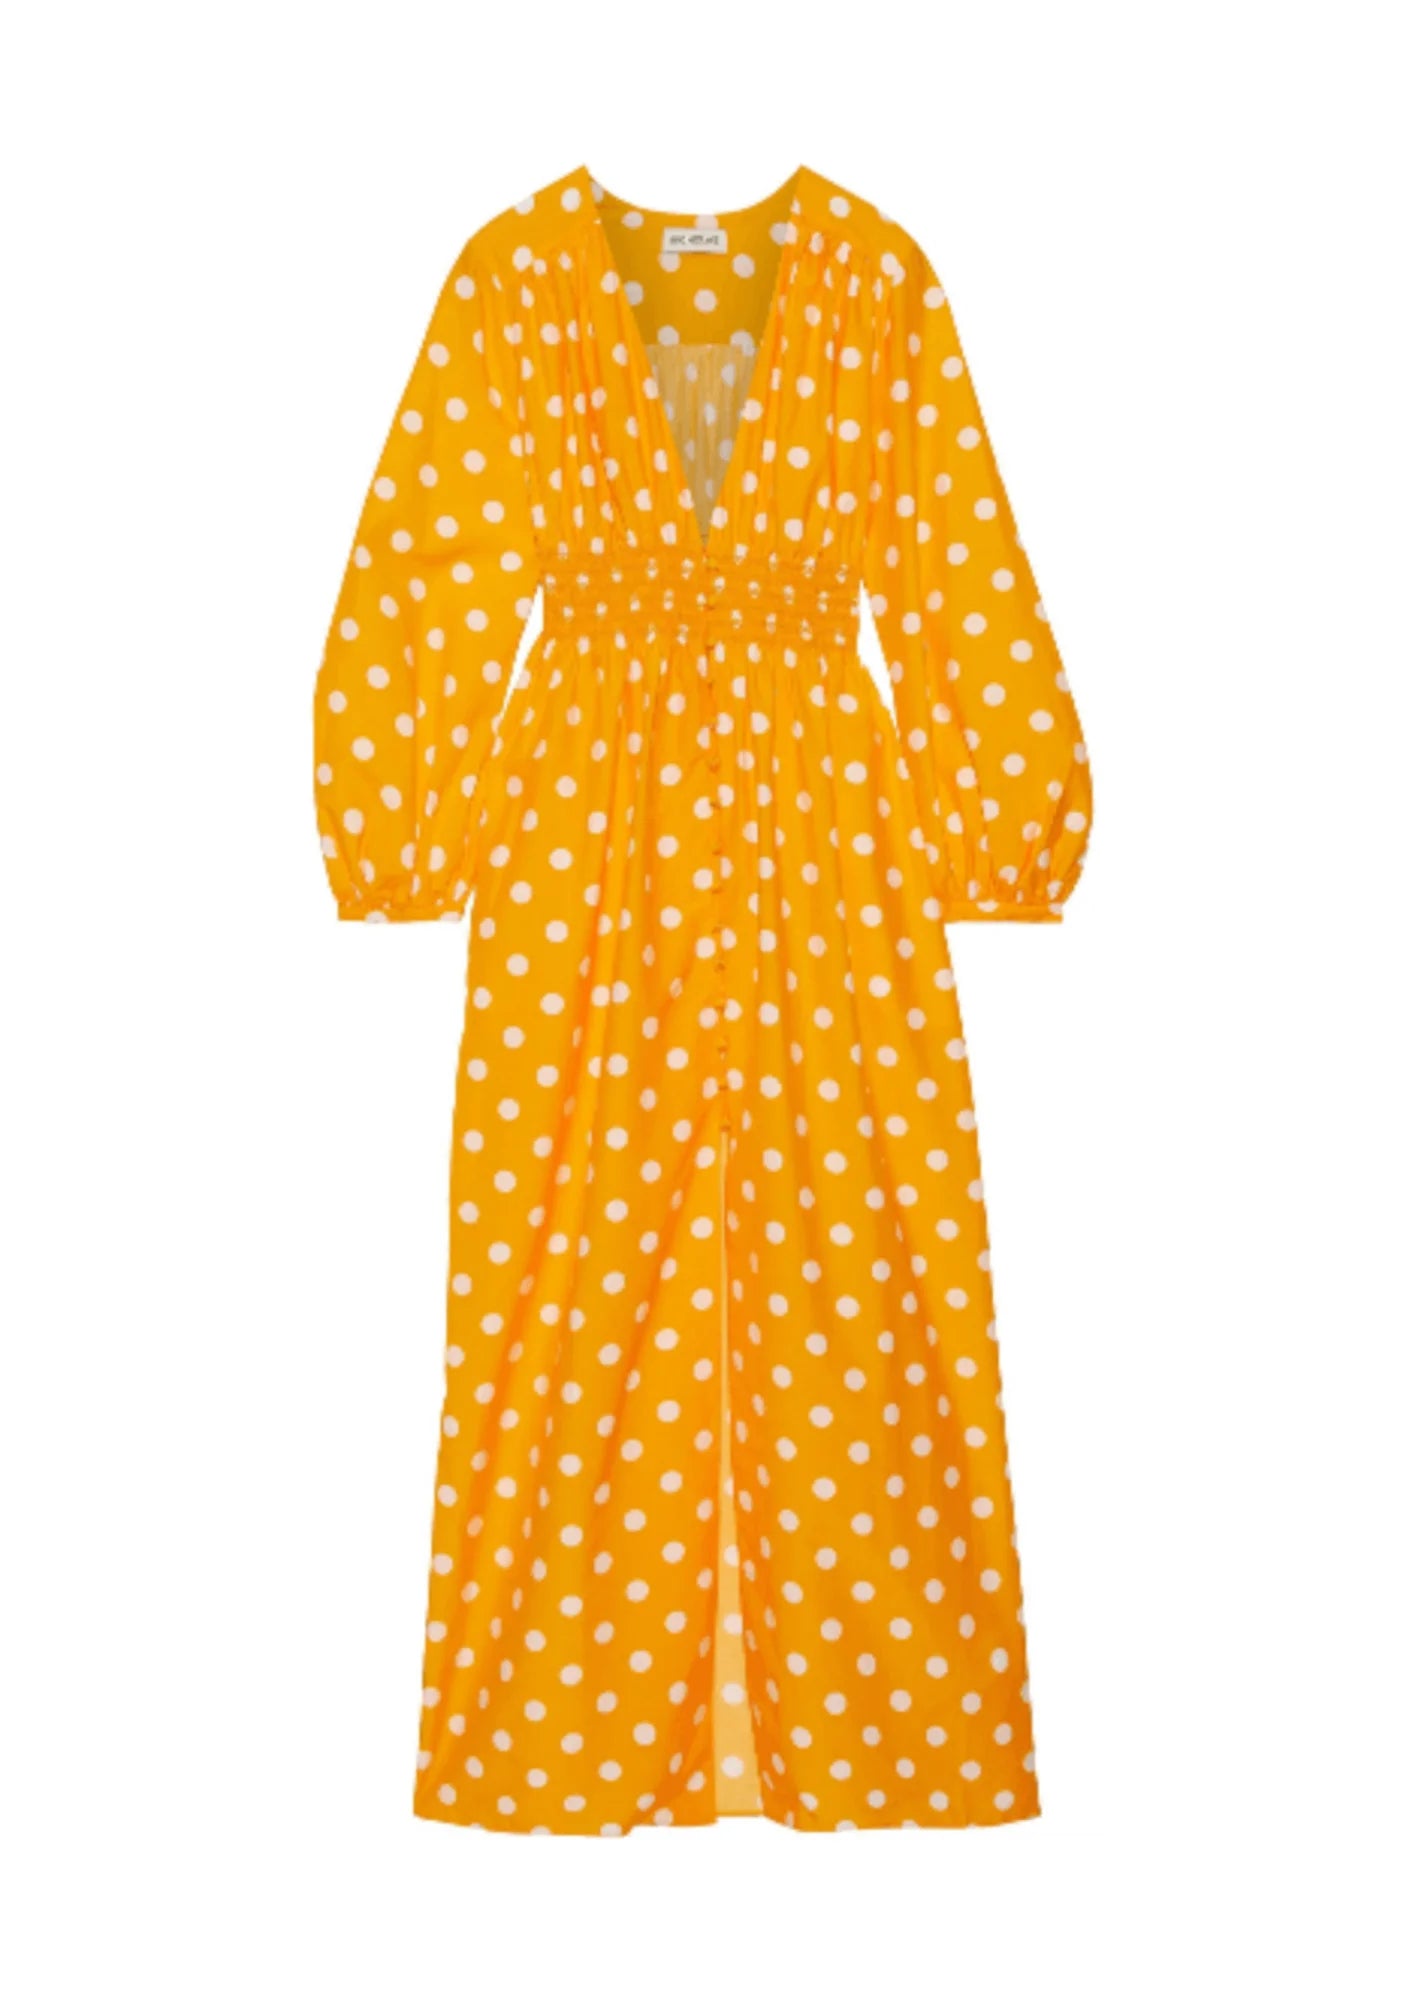 YELLOW DRESS WITH POLKA DOTS